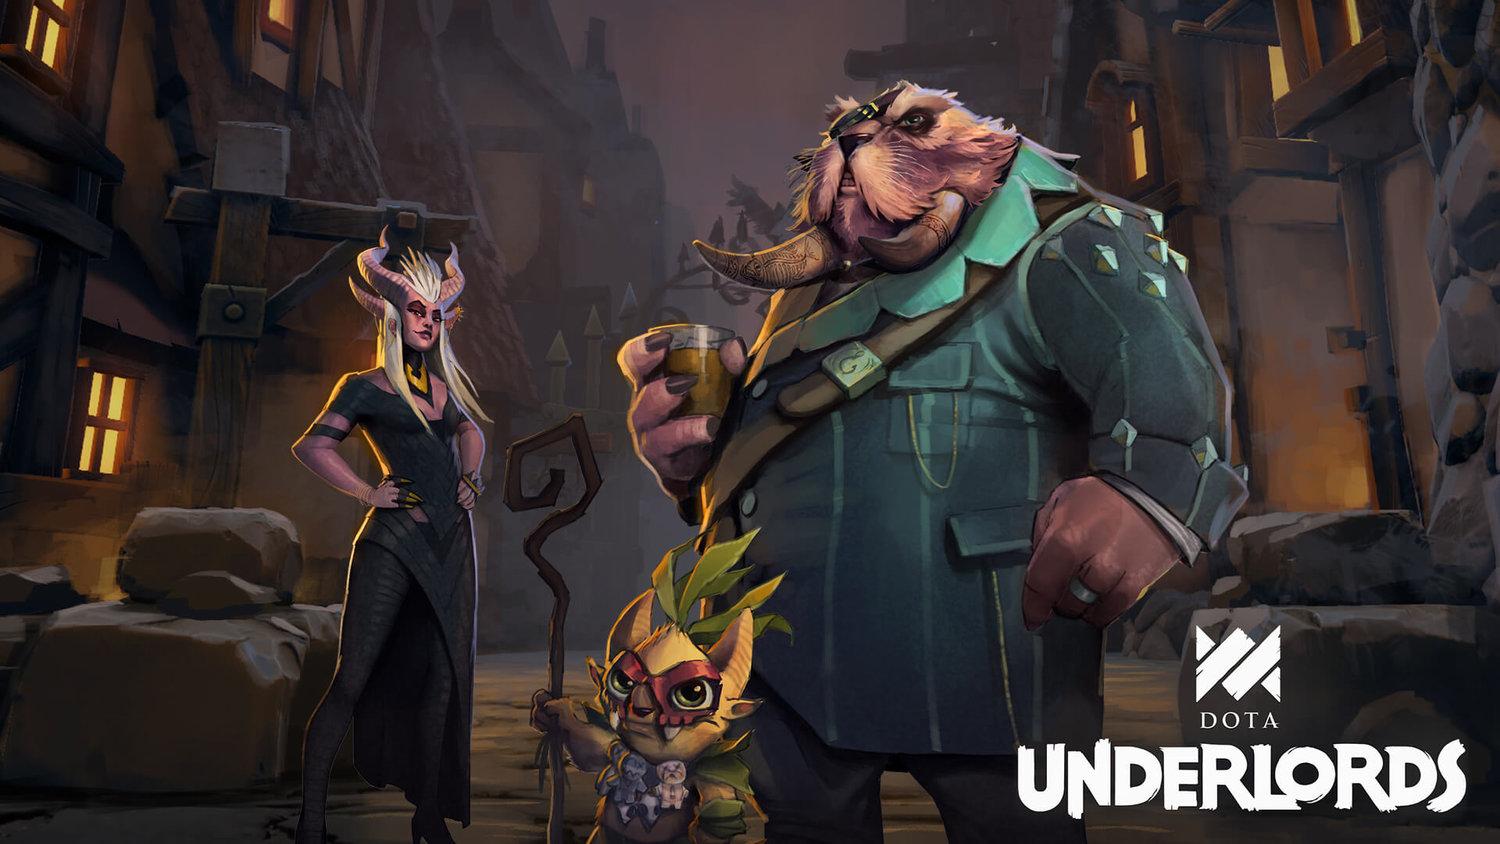 Dota Underlords is a streamlined Auto Chess with some nice